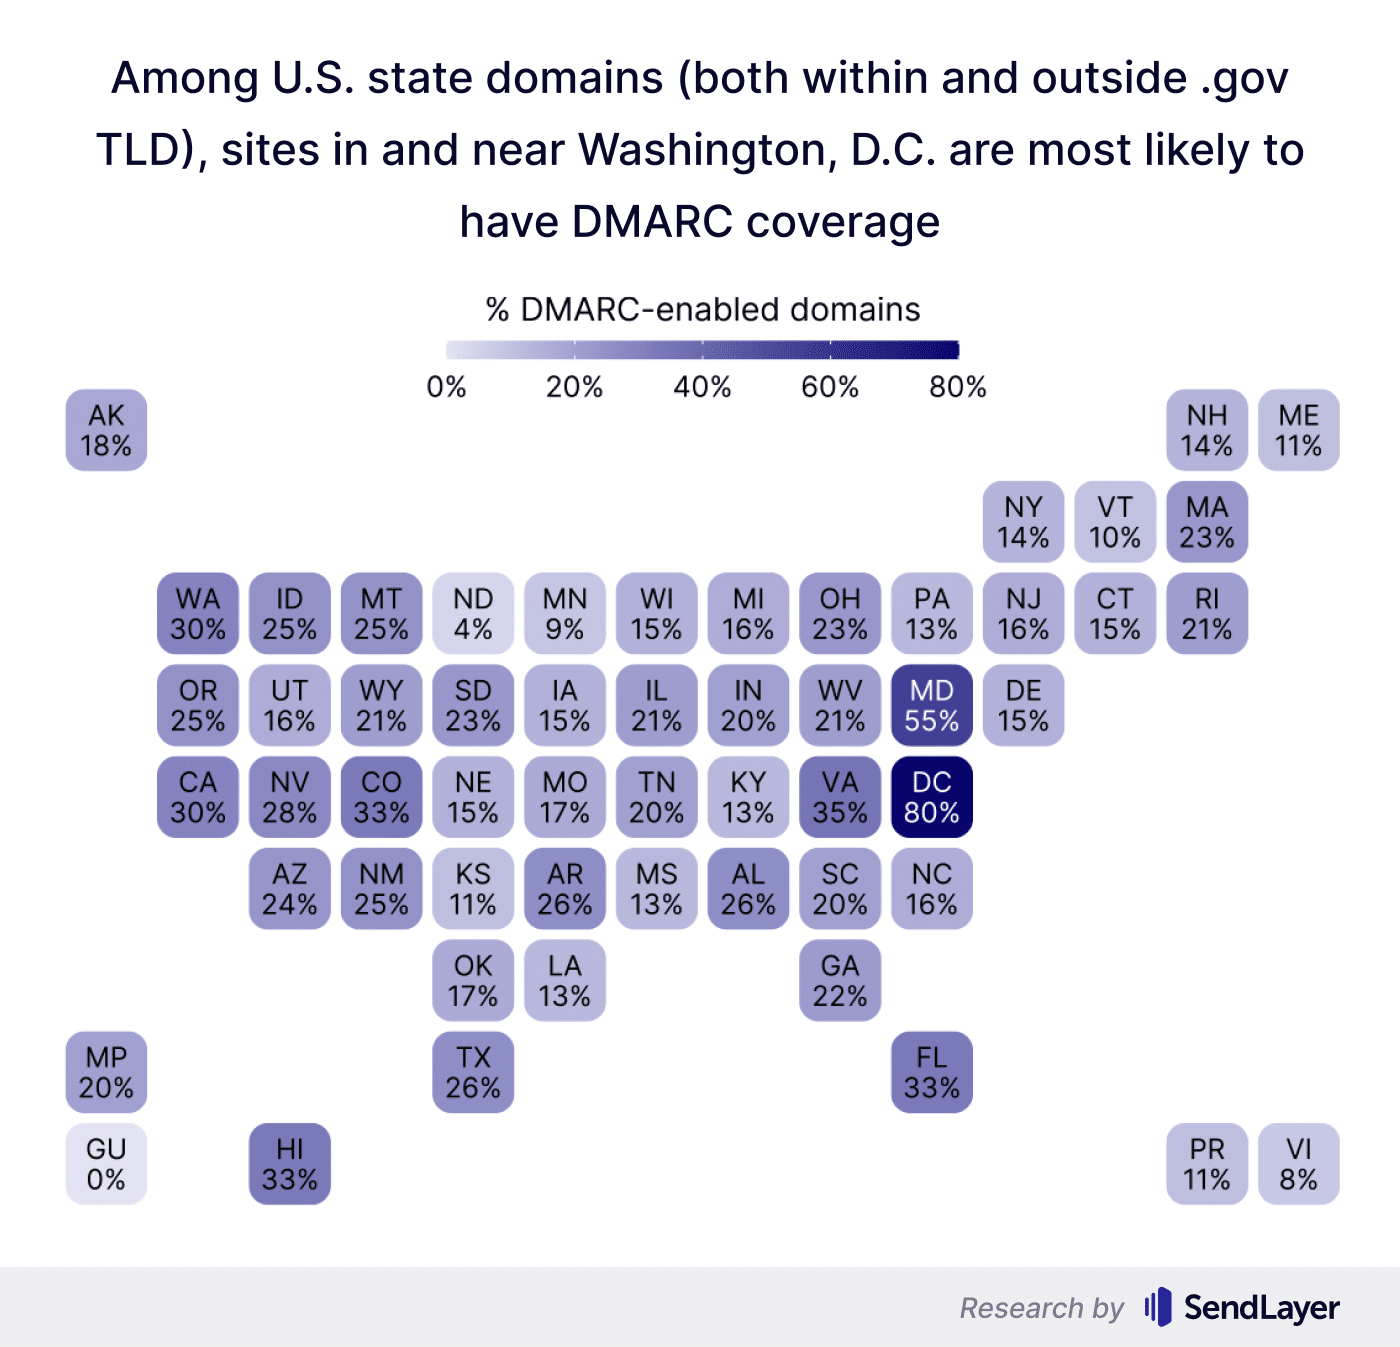 DMARC coverage of US states